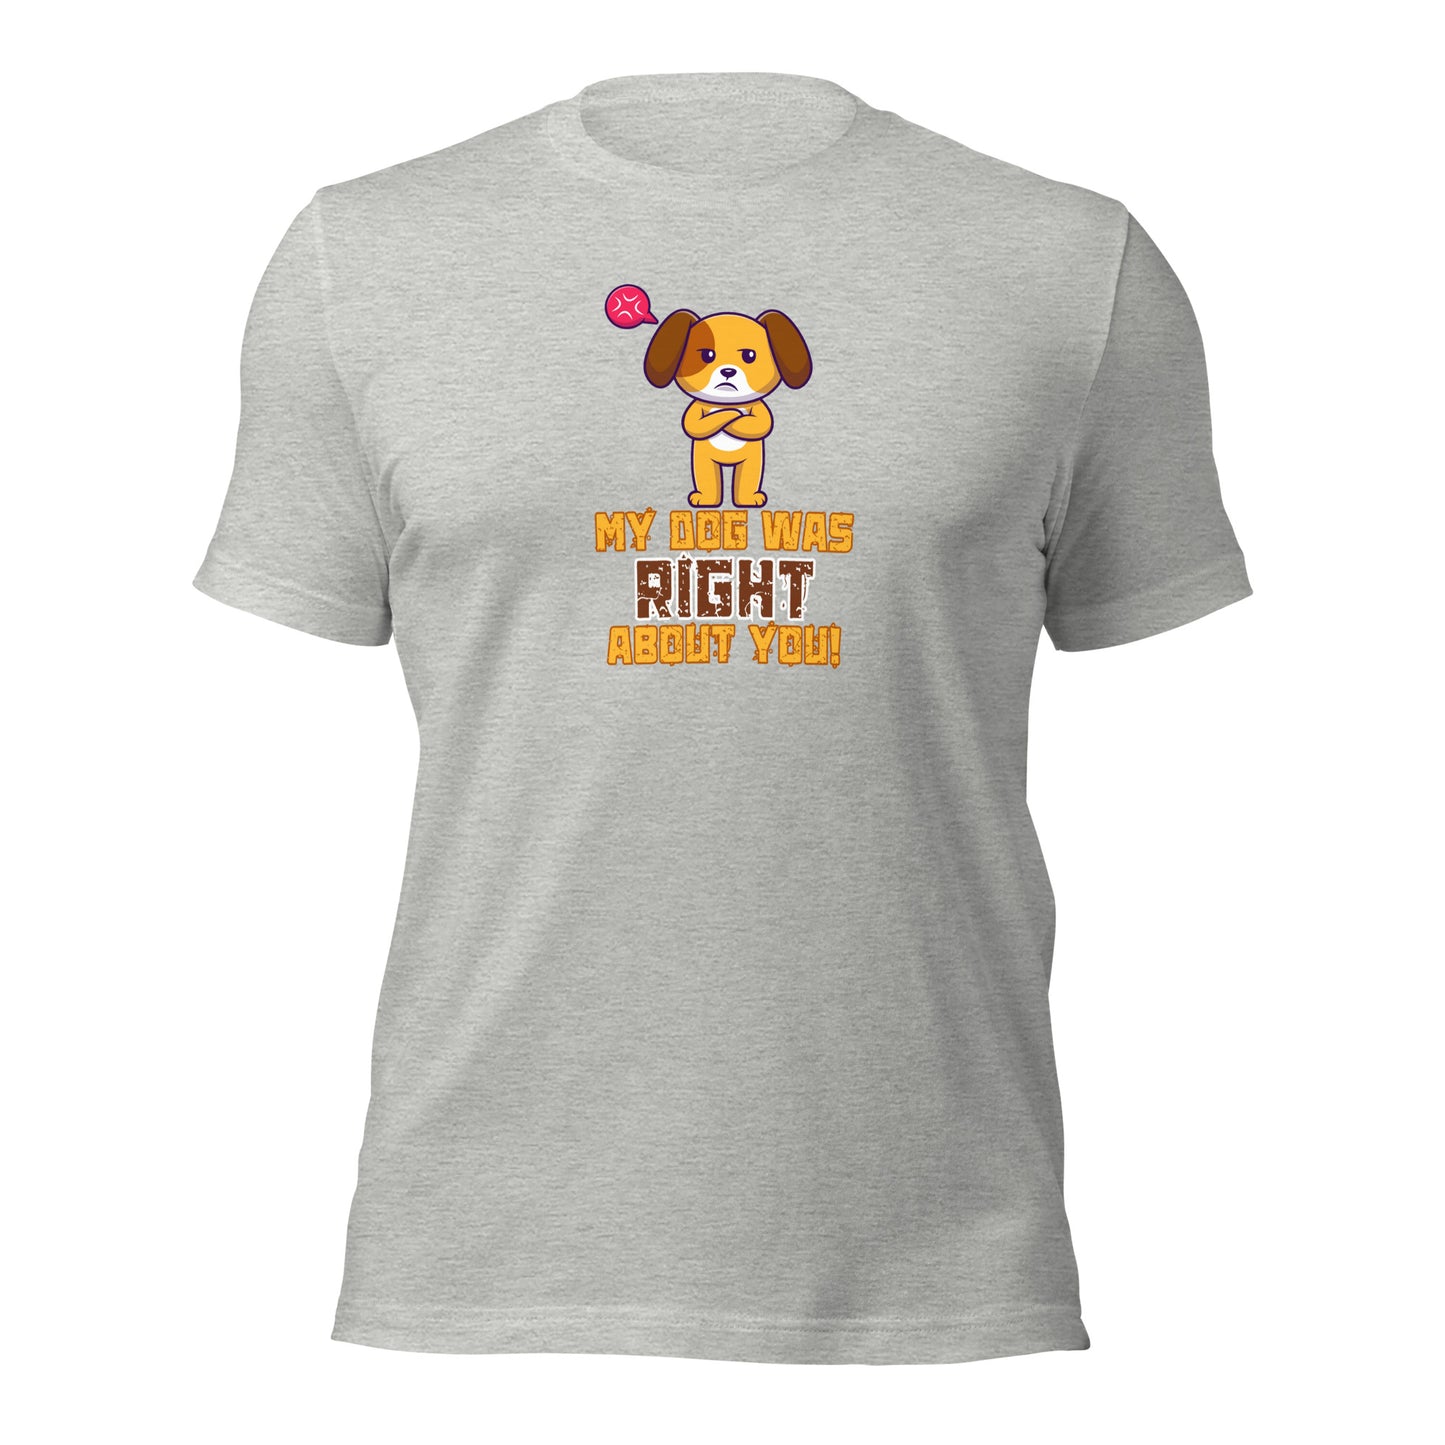 My Dog Was Right About You t-shirt